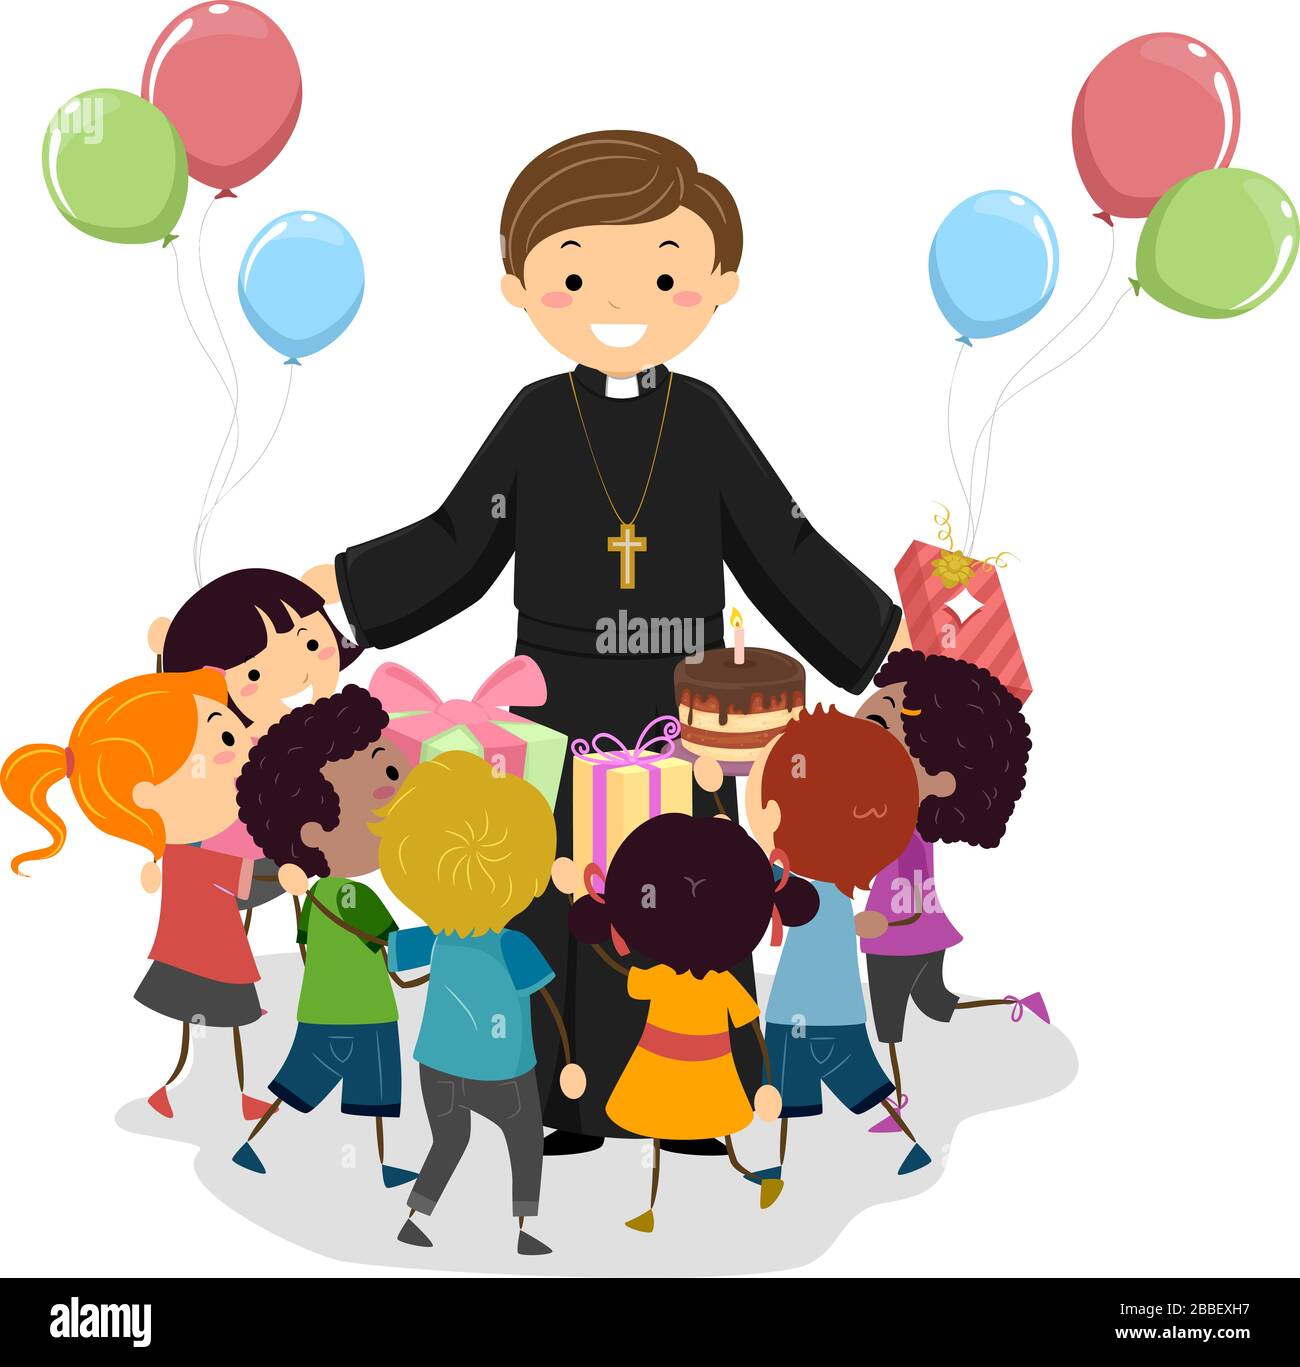 Illustration of Stickman Kids Giving Gifts to a Priest with Balloons, a  Cake and Other Gifts Stock Photo - Alamy